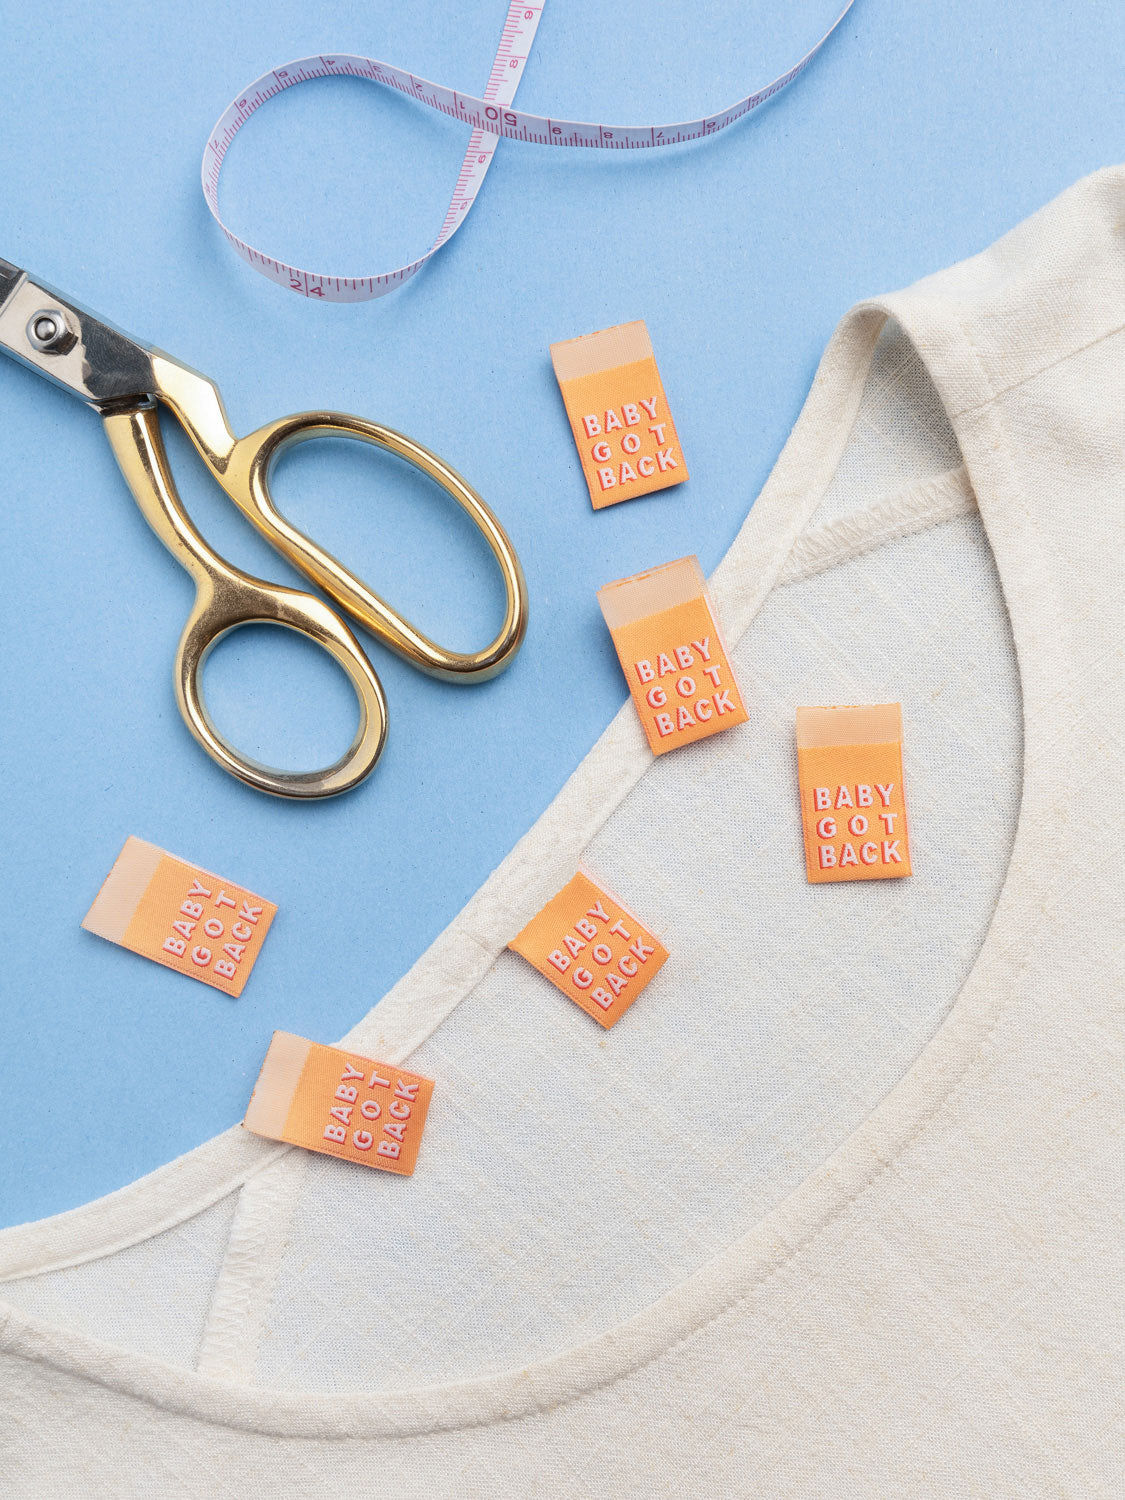 Core Fabrics Sewing Labels: 6 pack - Baby Got Back